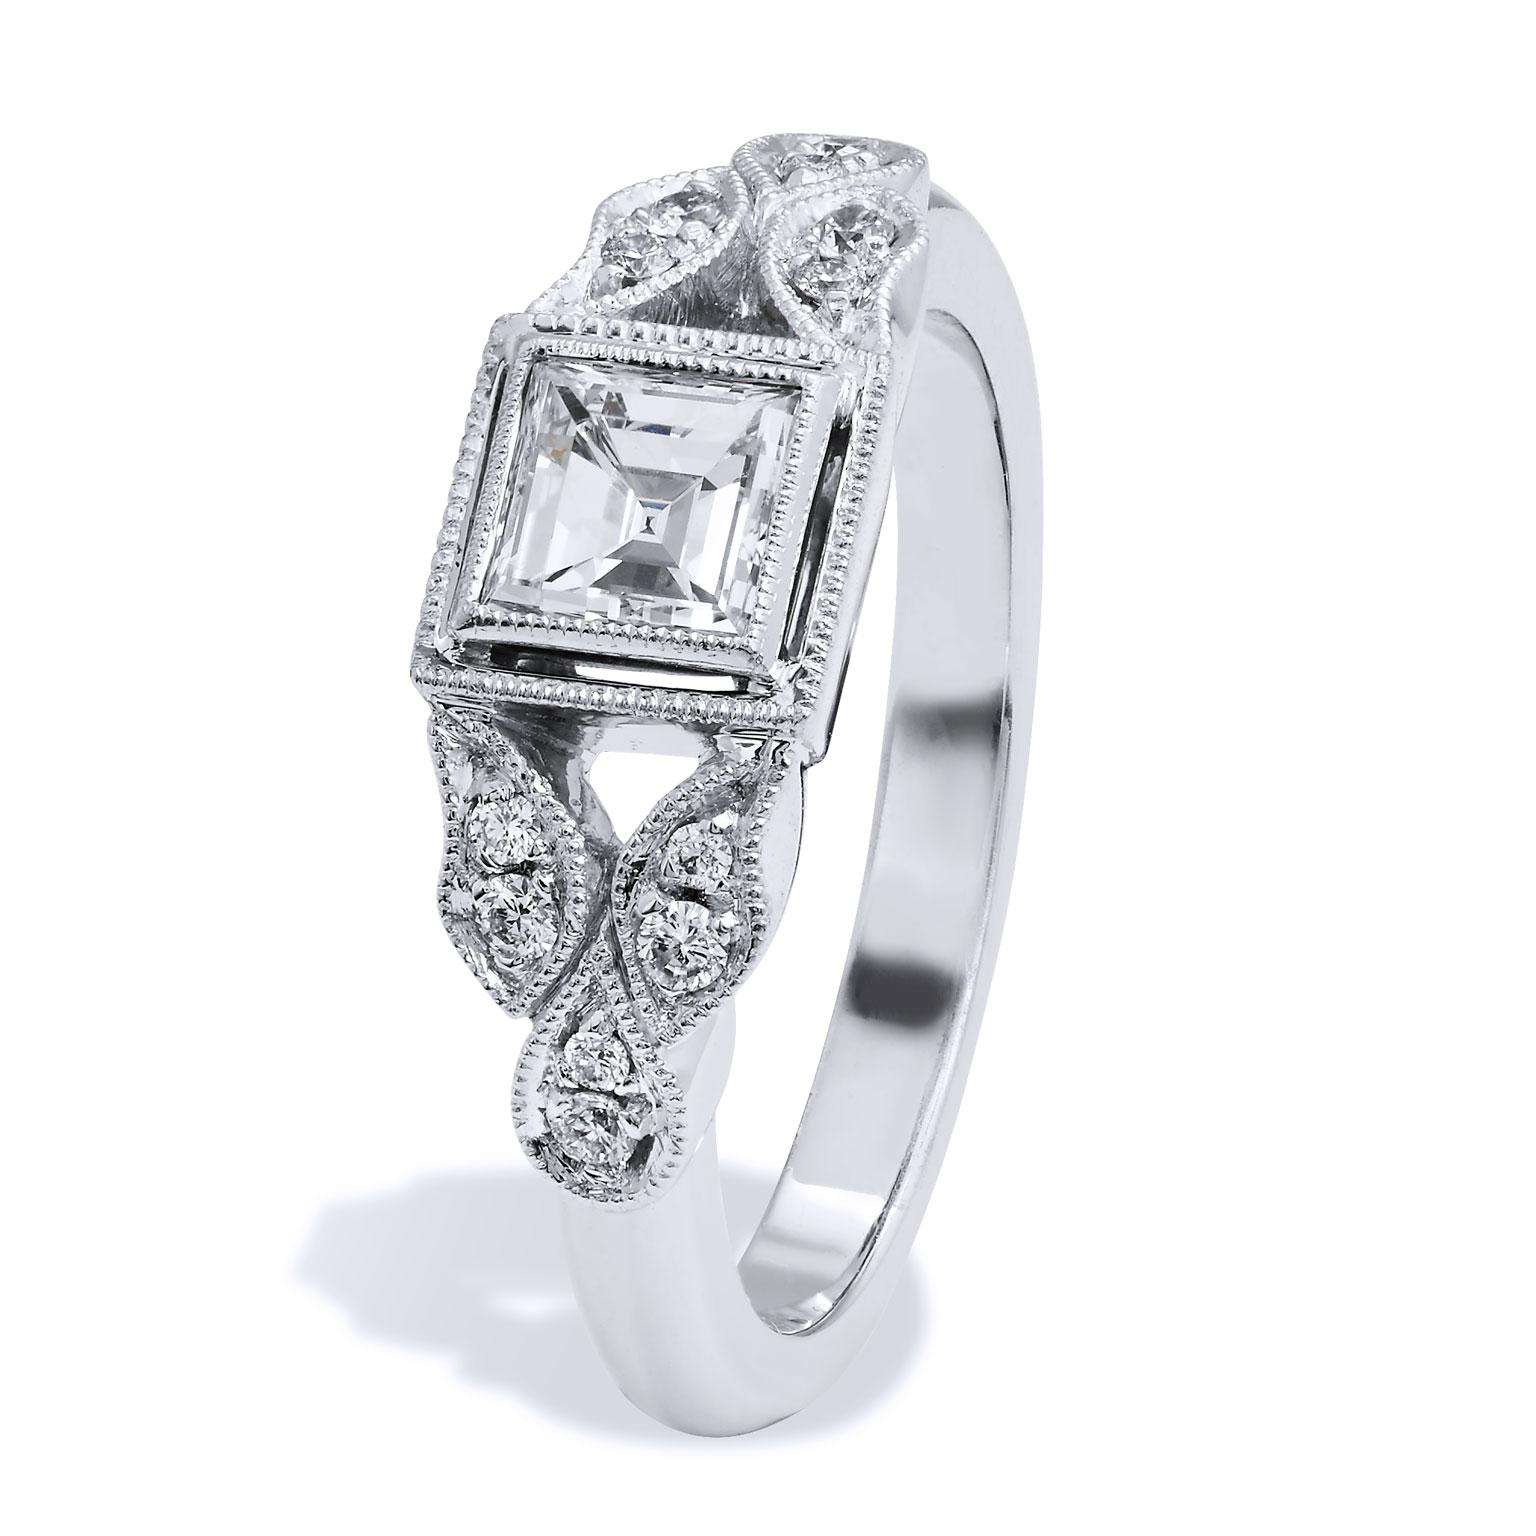 Handmade 0.52 Carat Carre Cut Diamond Solitaire Engagement Ring

This 18 karat white gold ring features a 0.52 carat Carre cut diamond at center (G/H/VS; 4.50 mm x 4.45 mm).  Carre cut diamonds are those rough diamonds that have a pyramid shape with